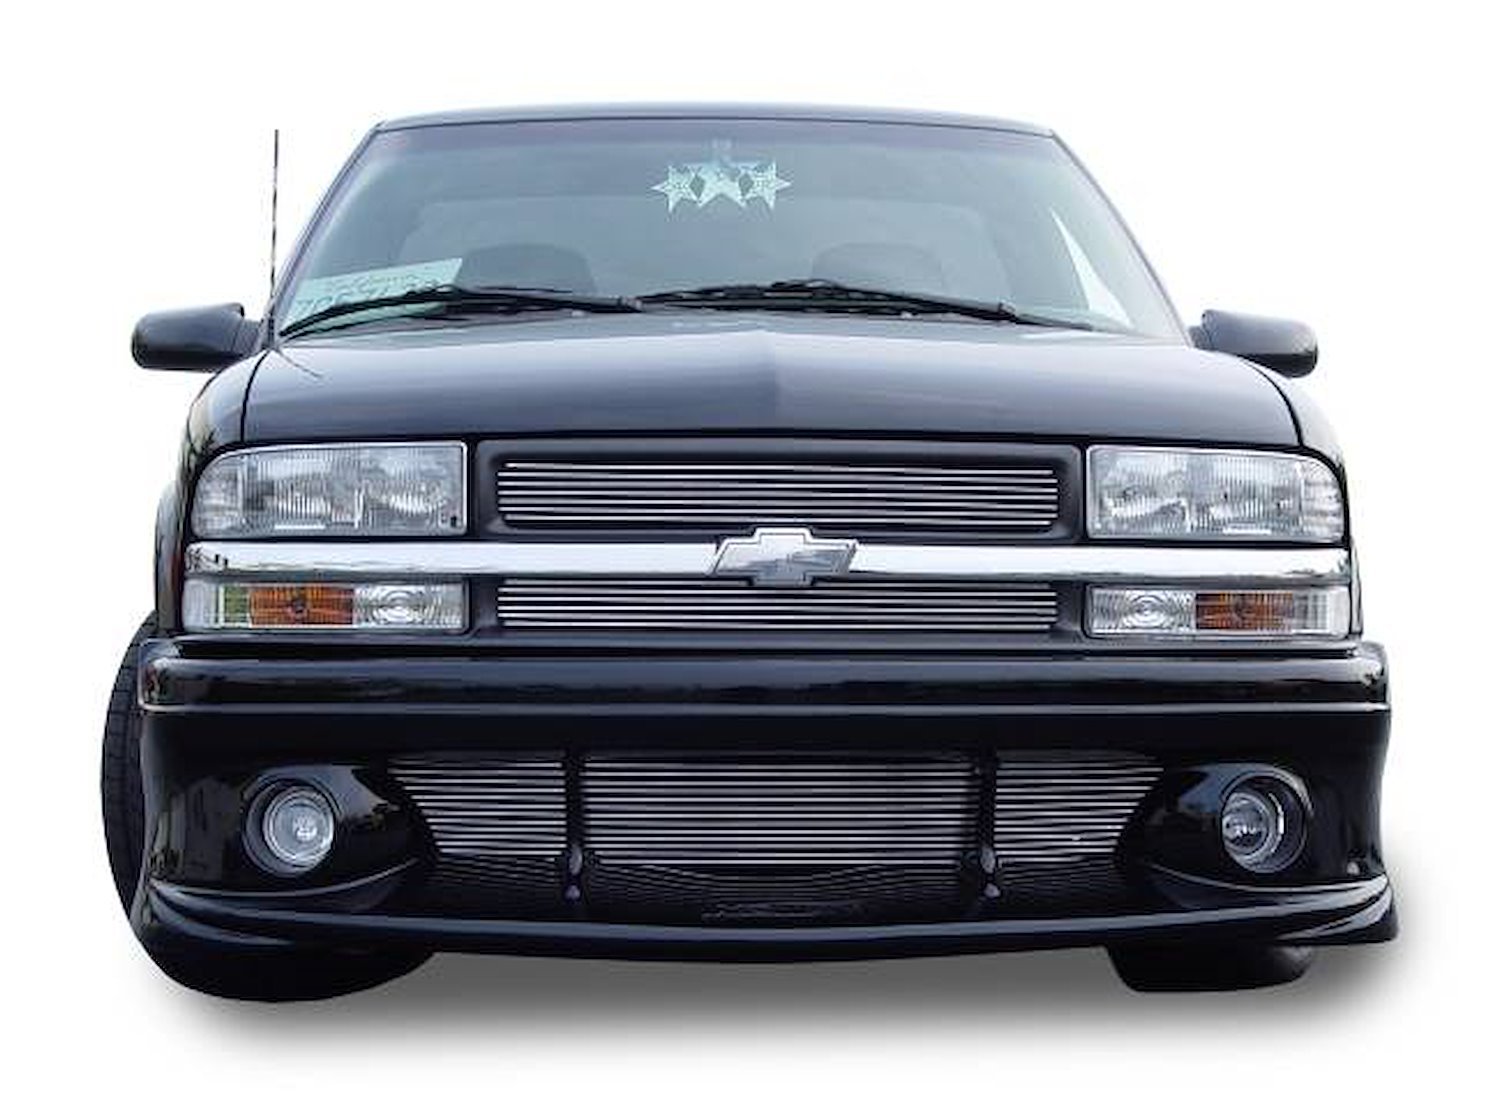 Billet Grille Bolt-On Overlay 1998-2004 Chevy S10 Truck